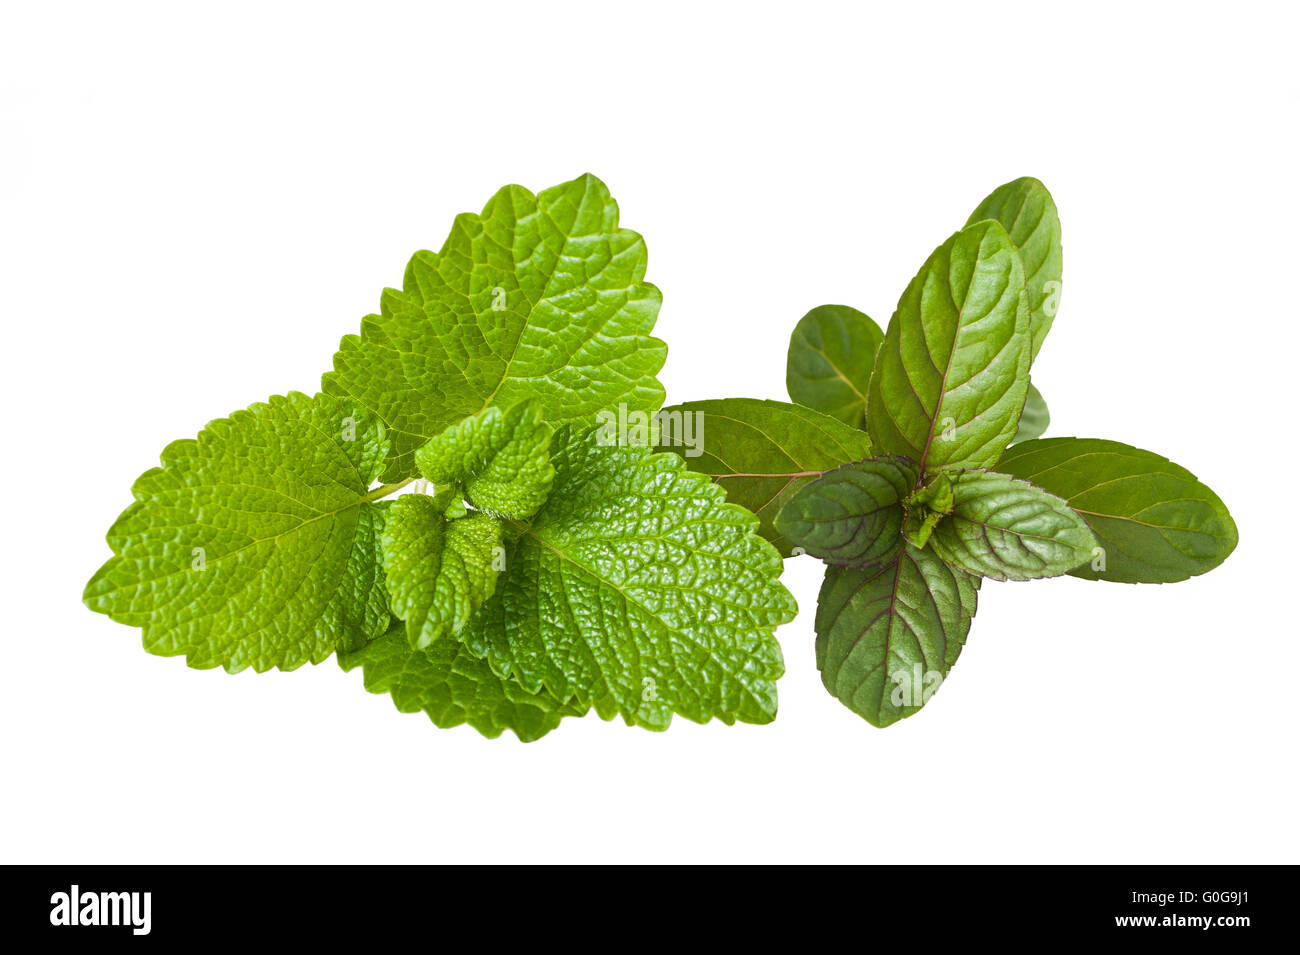 Peppermint and lemon balm  sprig isolated on white background Stock Photo